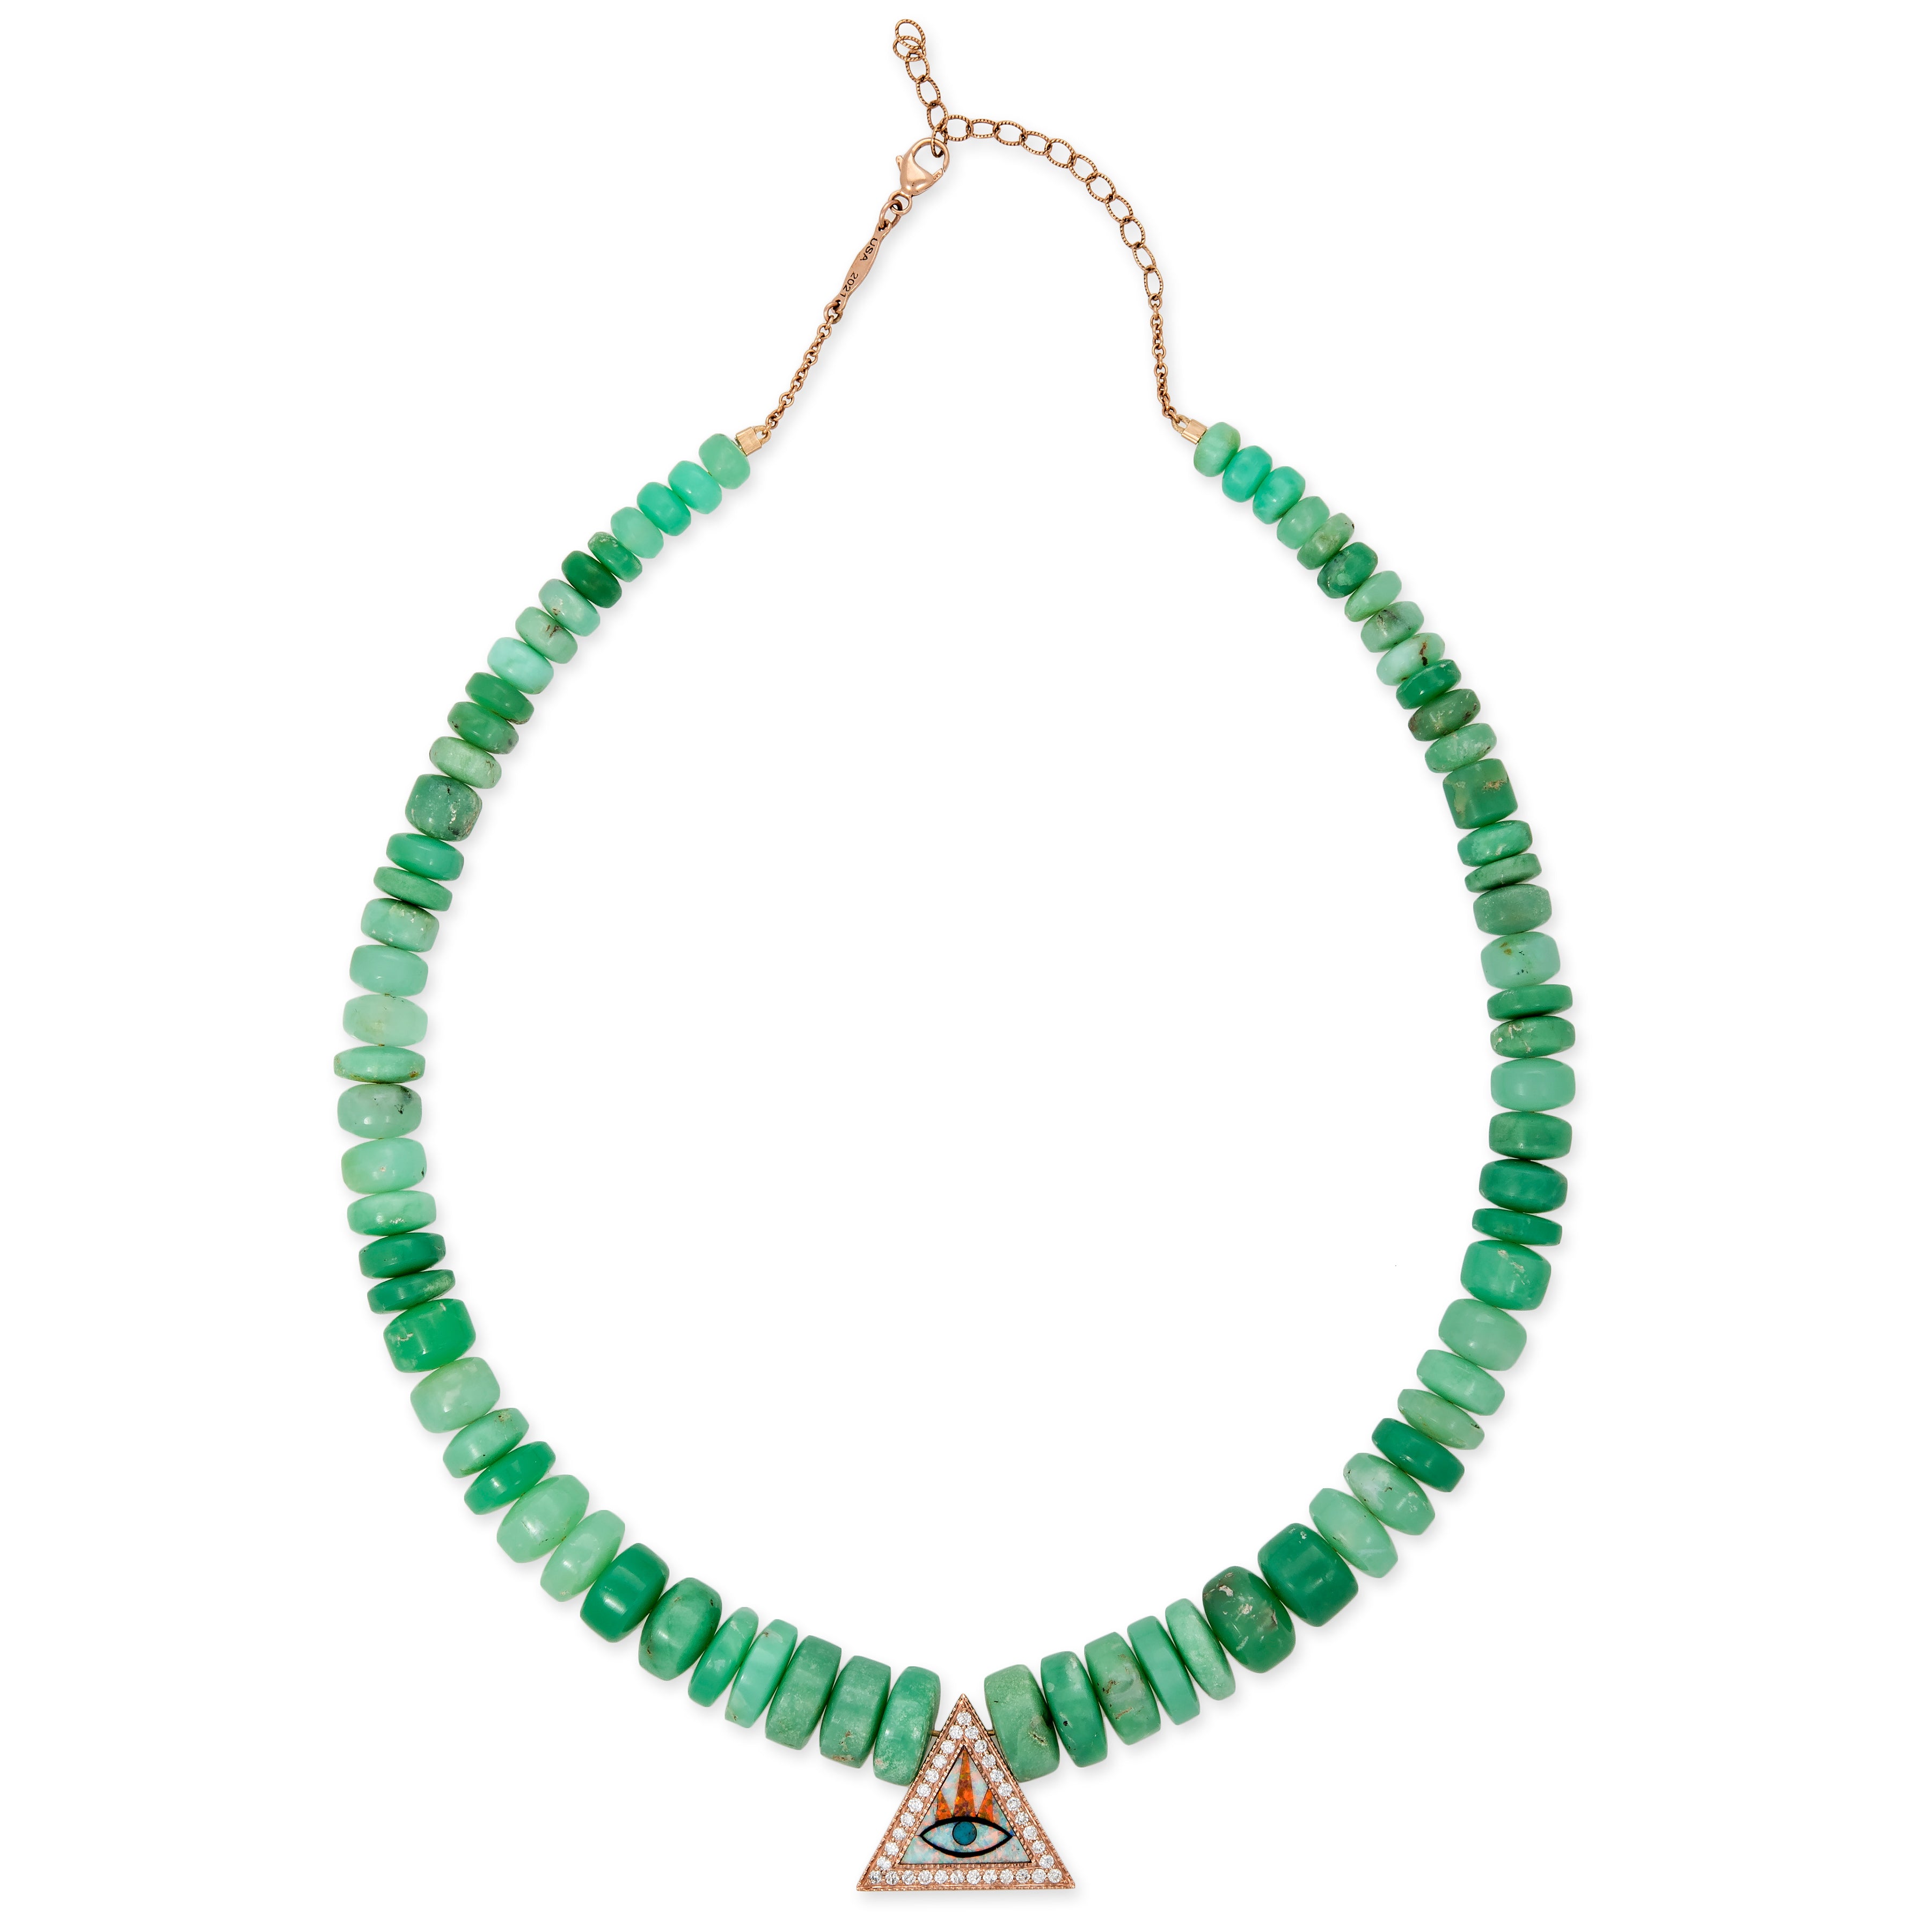 PAVE EYE TRIANGLE INLAY + GRADUATED CHRYSOPRASE CYLINDER BEADED NECKLACE